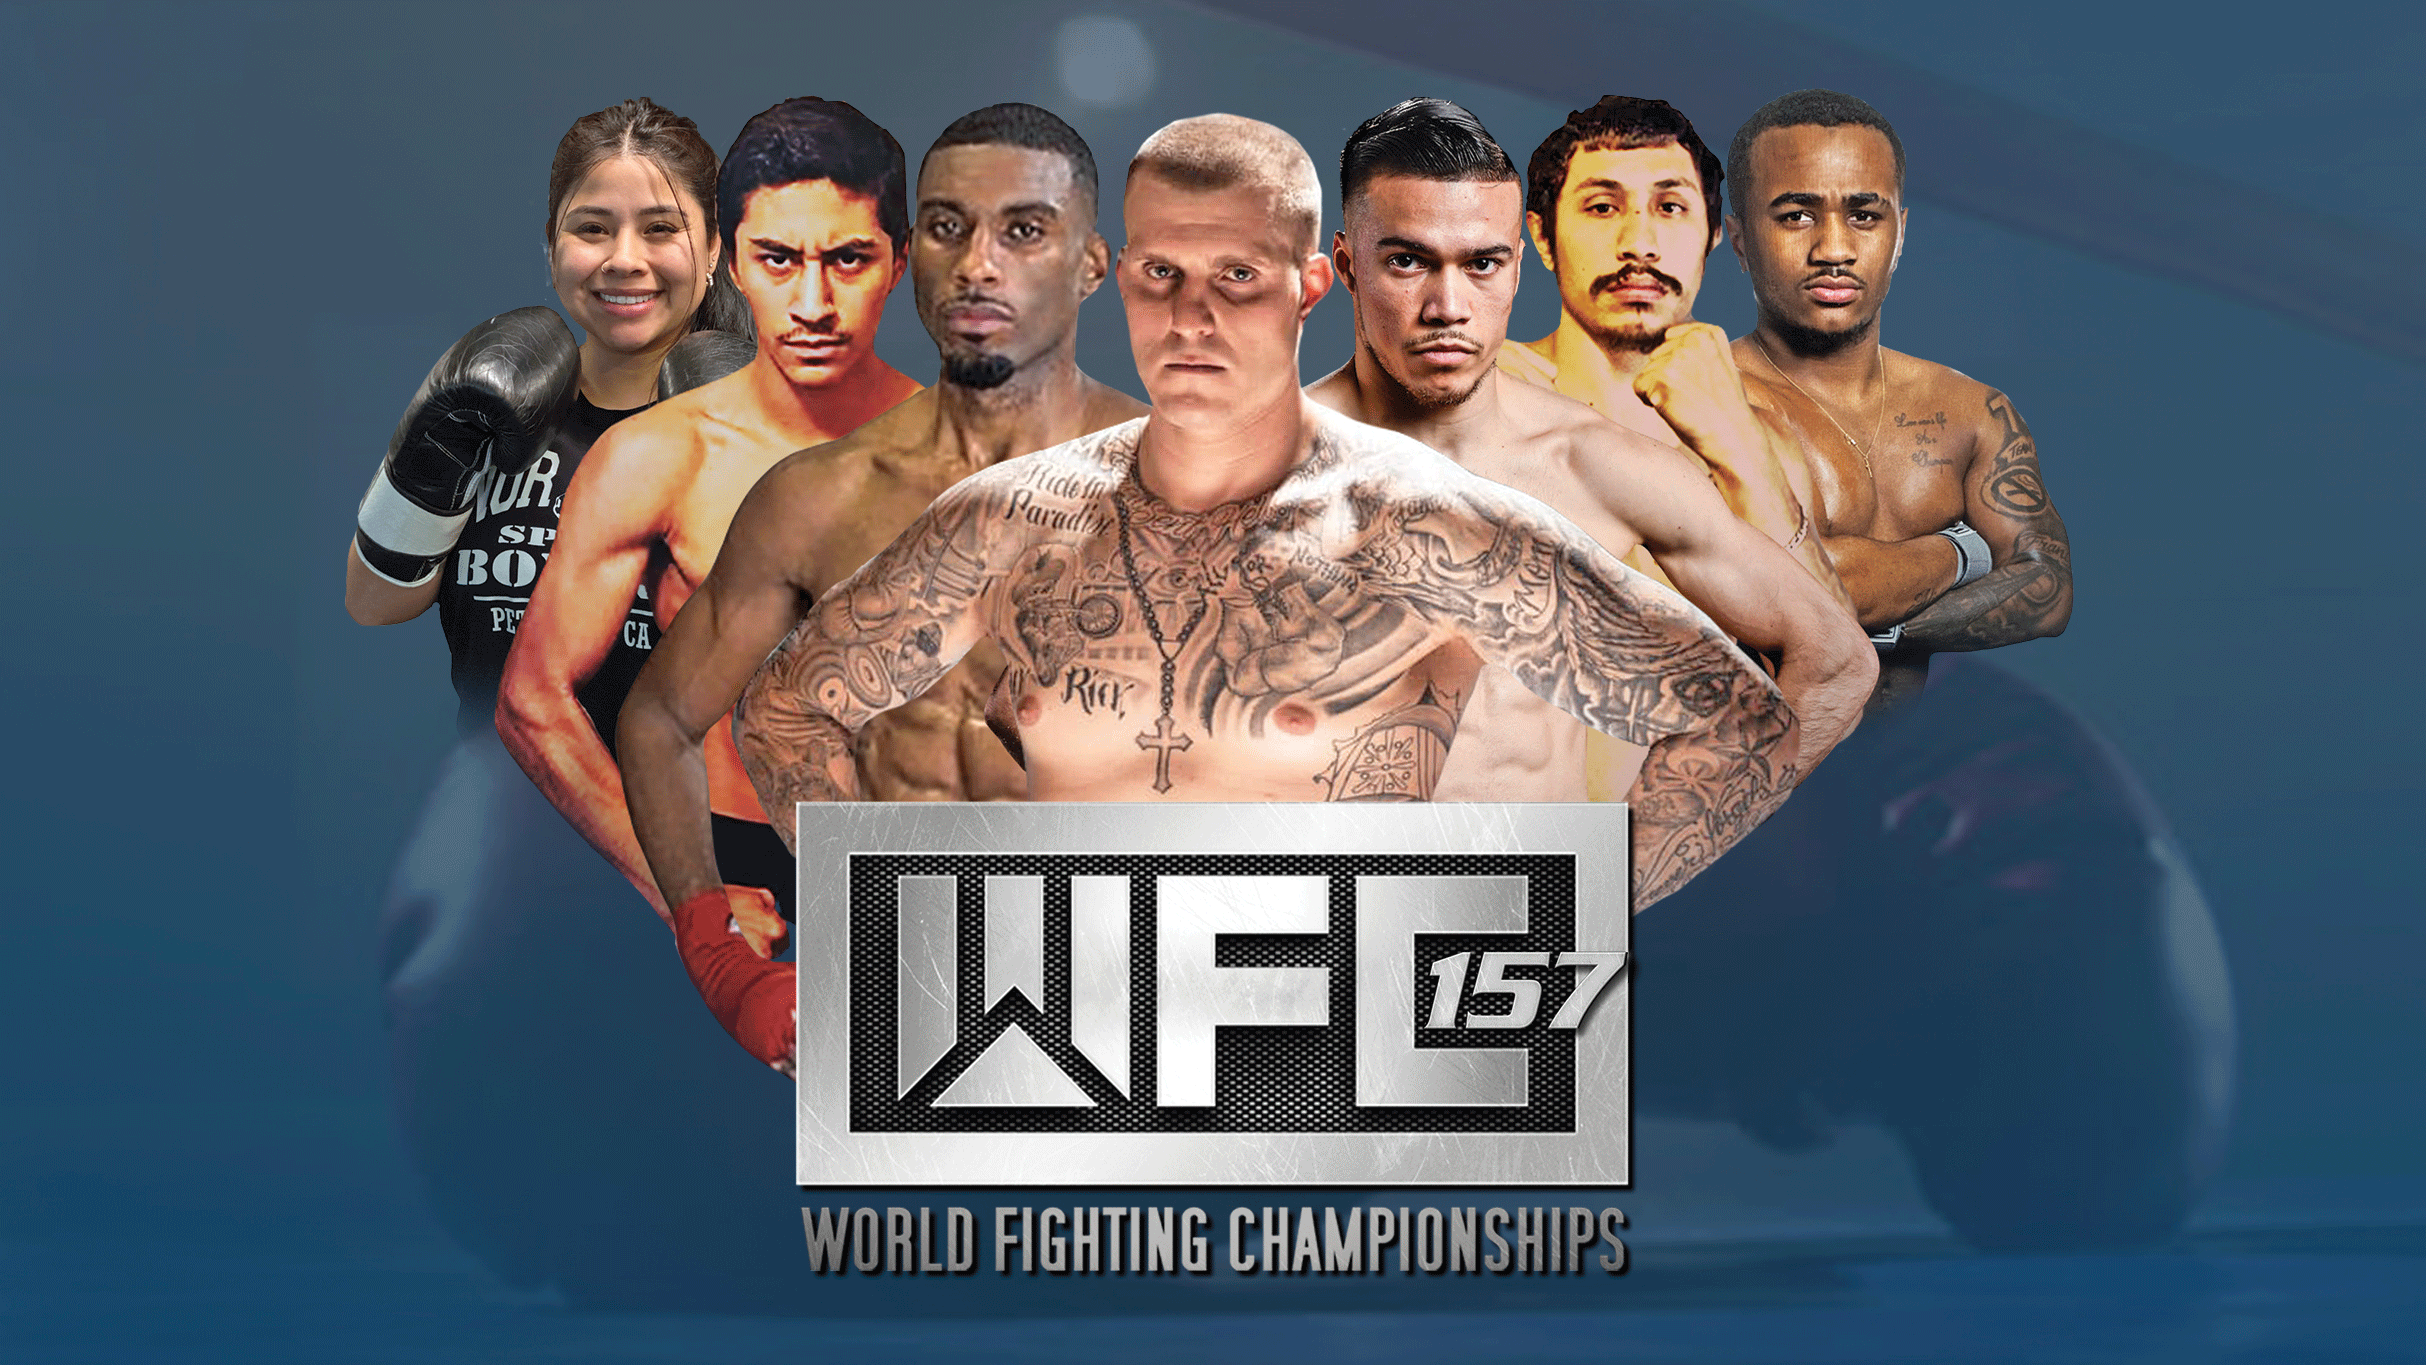 WFC 165 - Live Cage Fights in Northfield promo photo for Official Platinum presale offer code